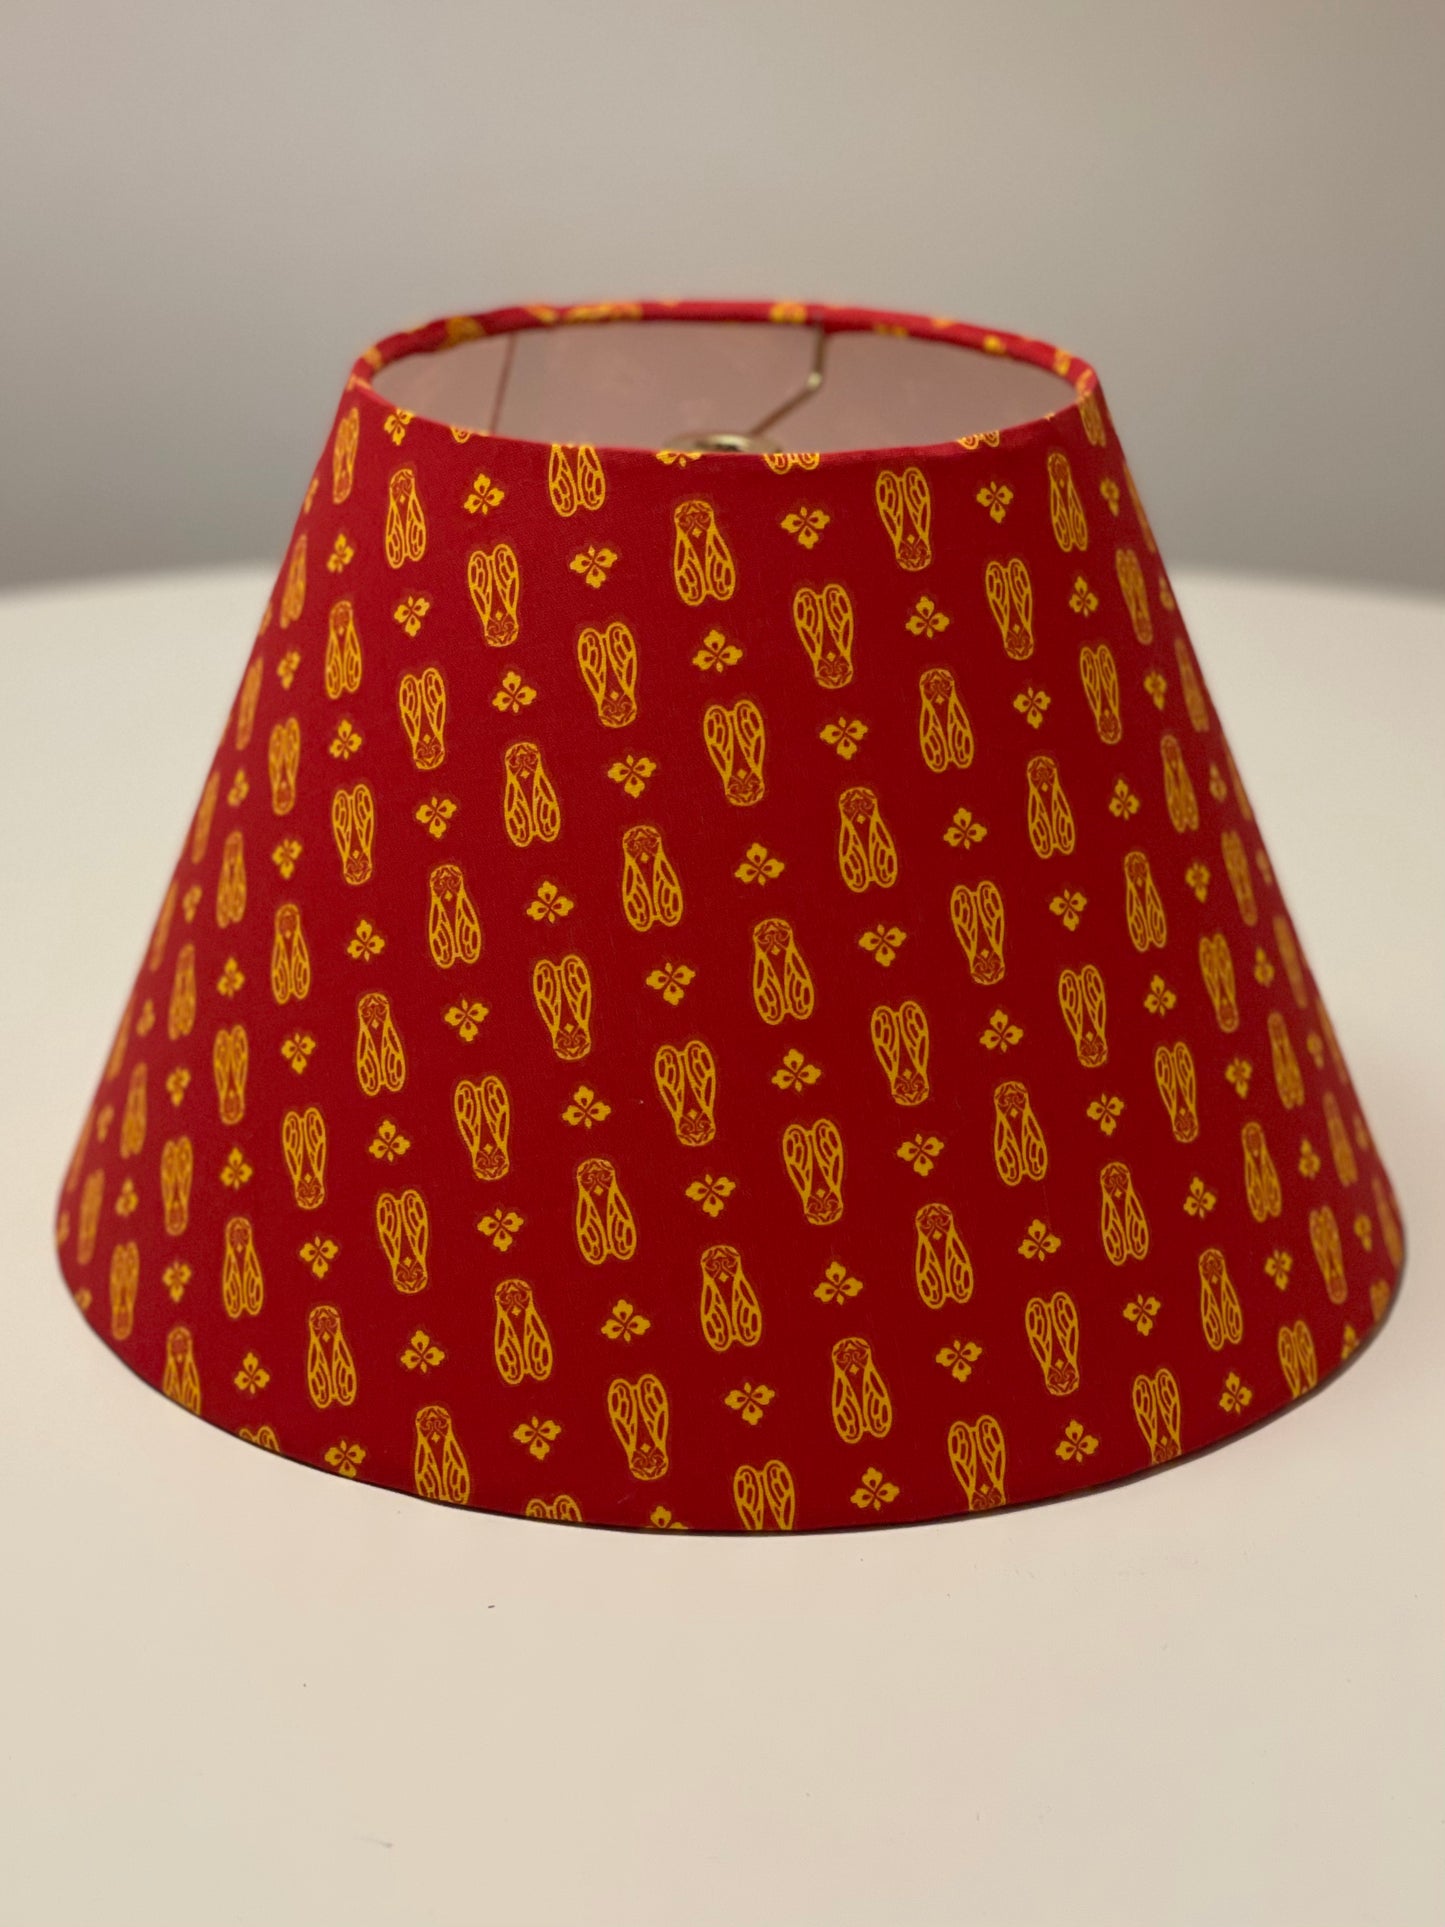 Small Conical Lampshade. Darling Provençal "Cicada" print in Tomato Red and Yellow/Orange.